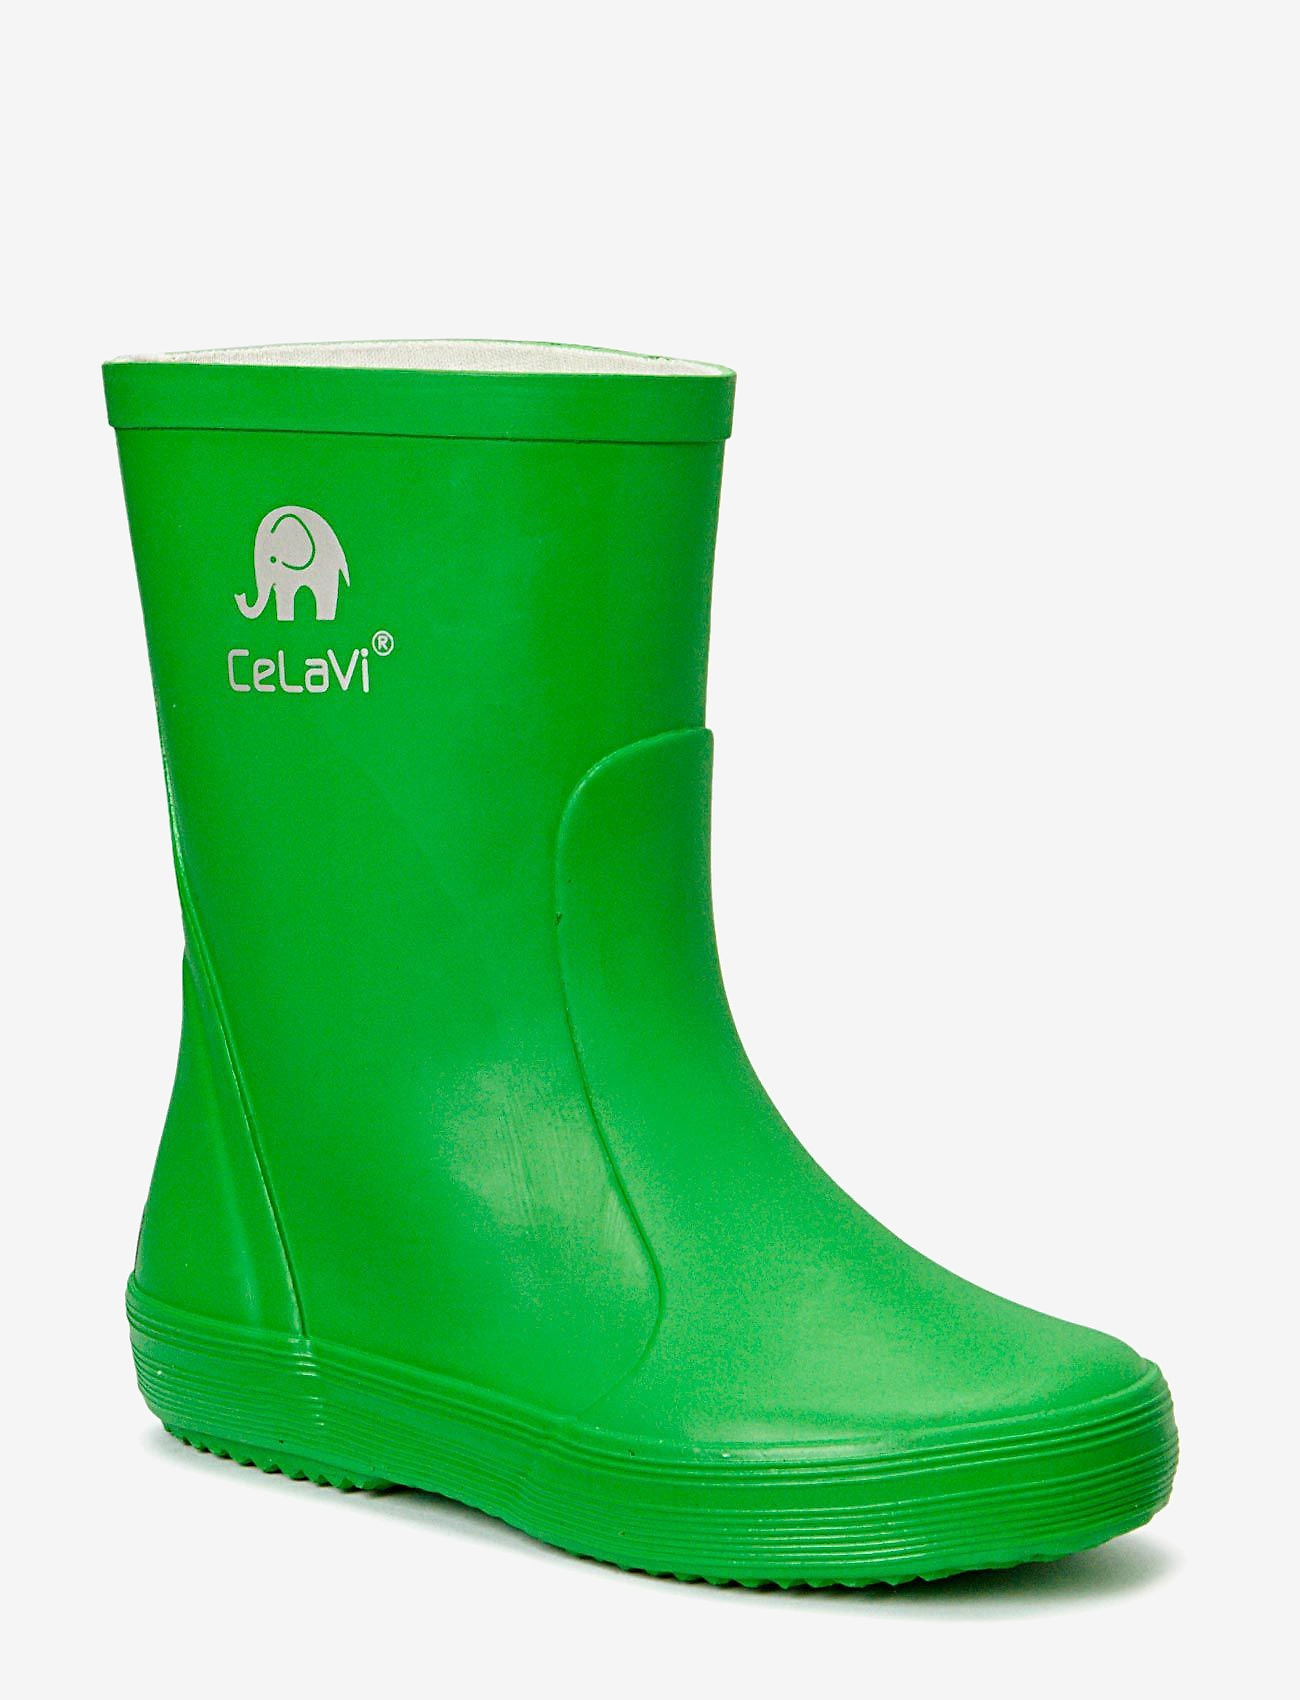 CeLaVi - Basic wellies -solid - unlined rubberboots - green - 0